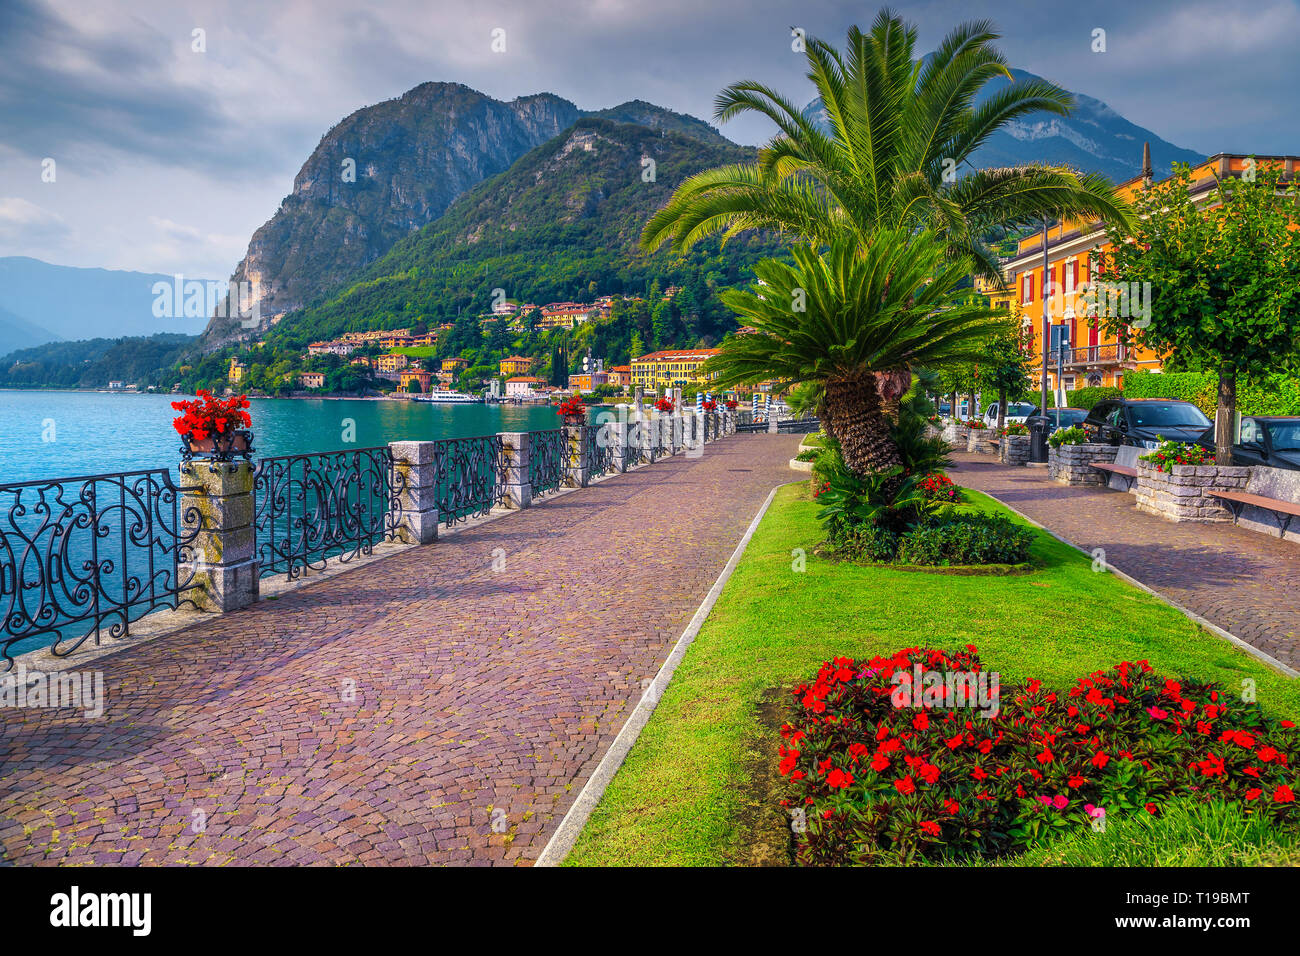 Summer holiday location, spectacular promenade with colorful flowers in public park and palm trees on the shore, Lake Como, Menaggio, Lombardy region, Stock Photo